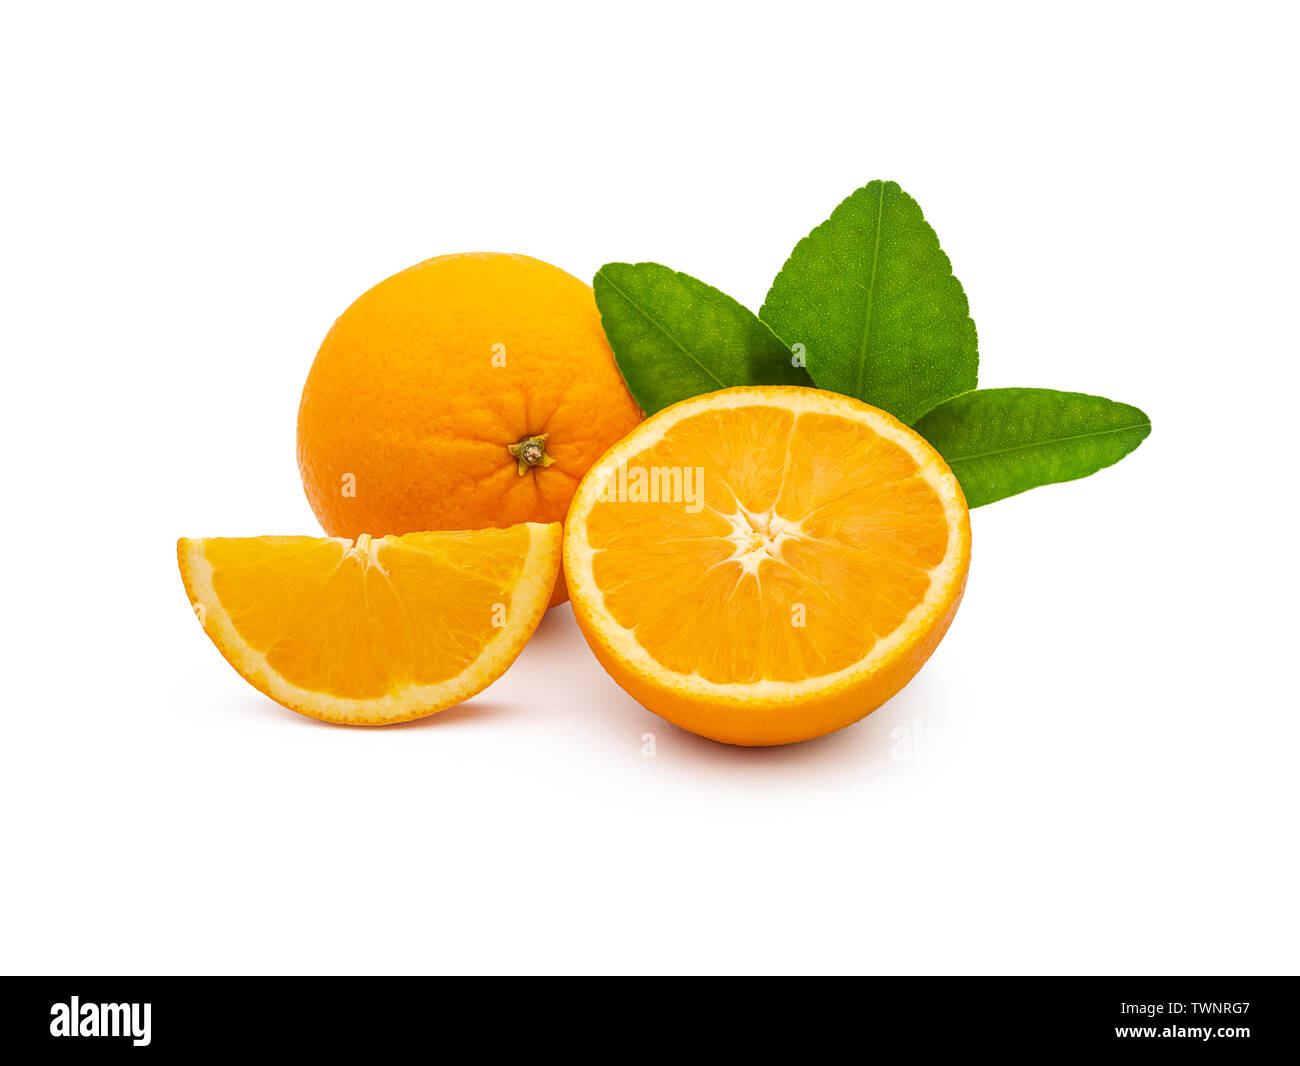 a group of fresh orange fruits with green leaves, isolated on white background with clipping path. fruit product display or montage, studio shot Stock Photo